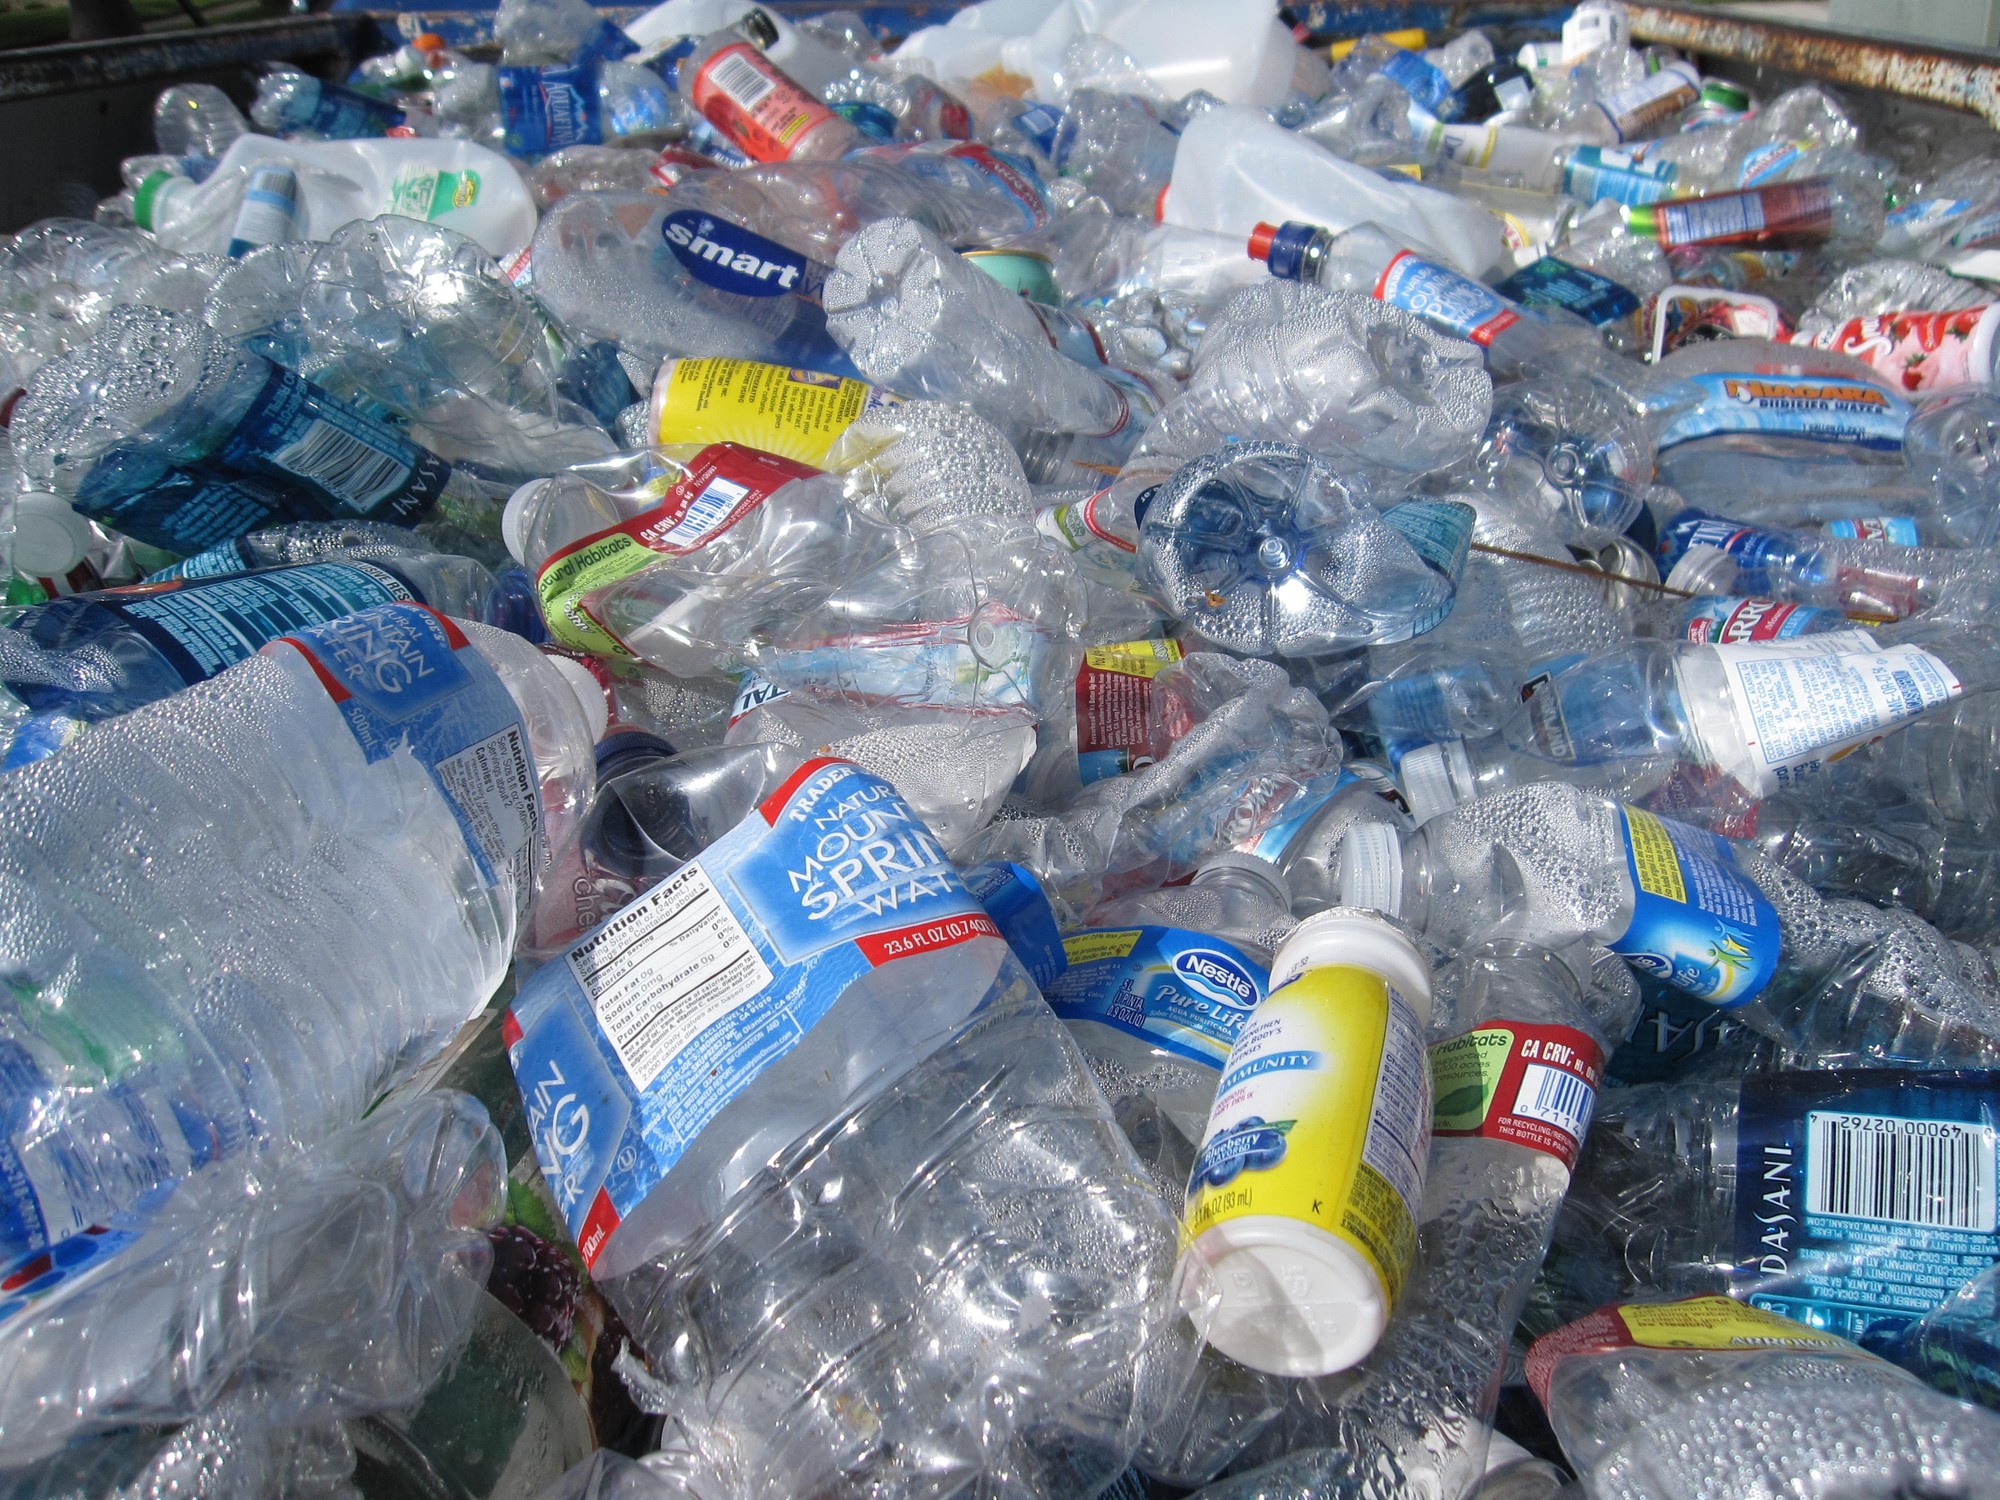 Plastic waste considered by the Basel Convention